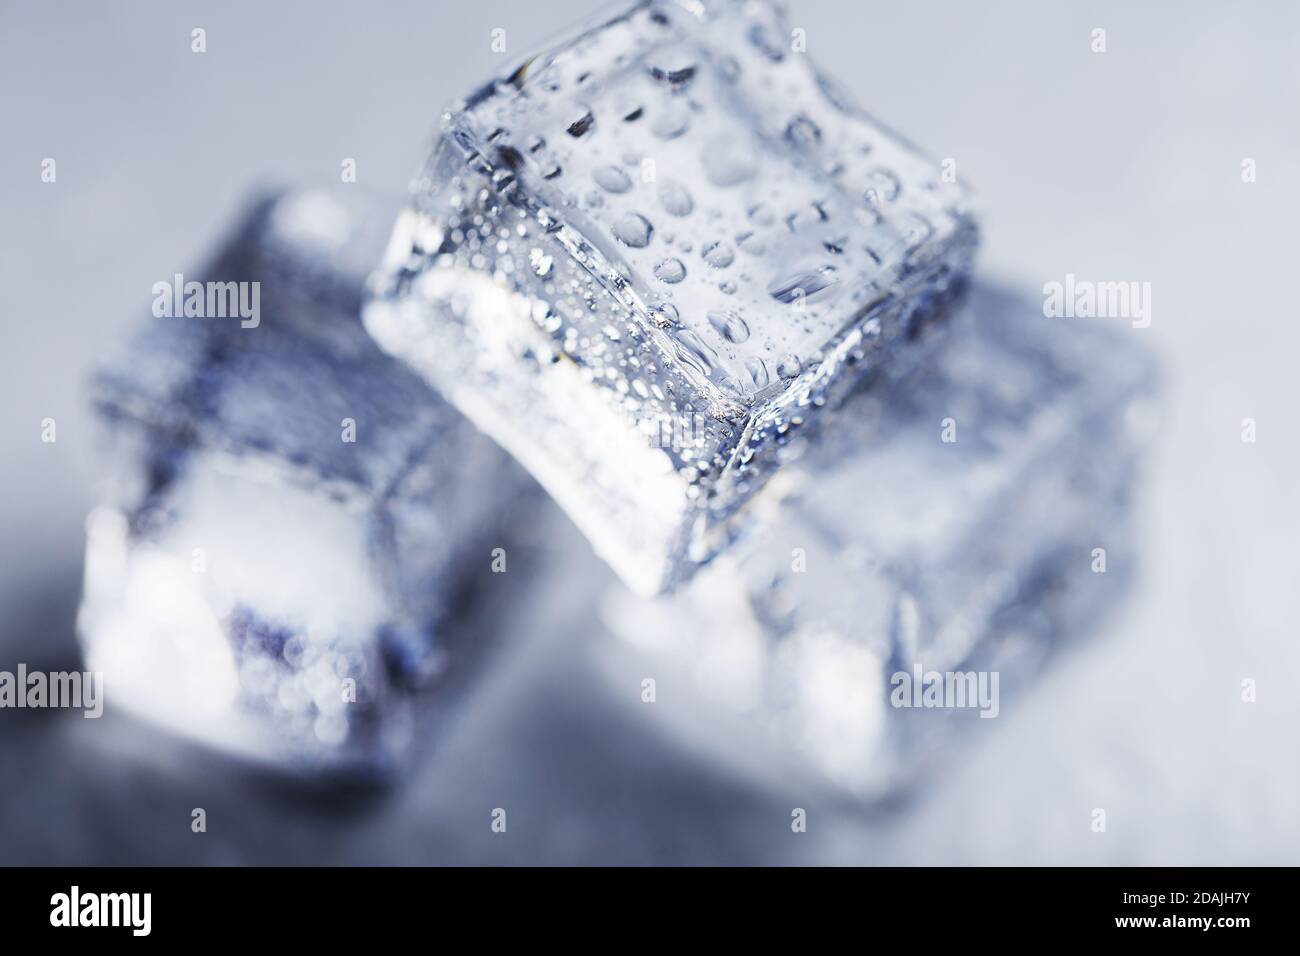 Blocks of Ice With water Drops close-up. Stock Photo